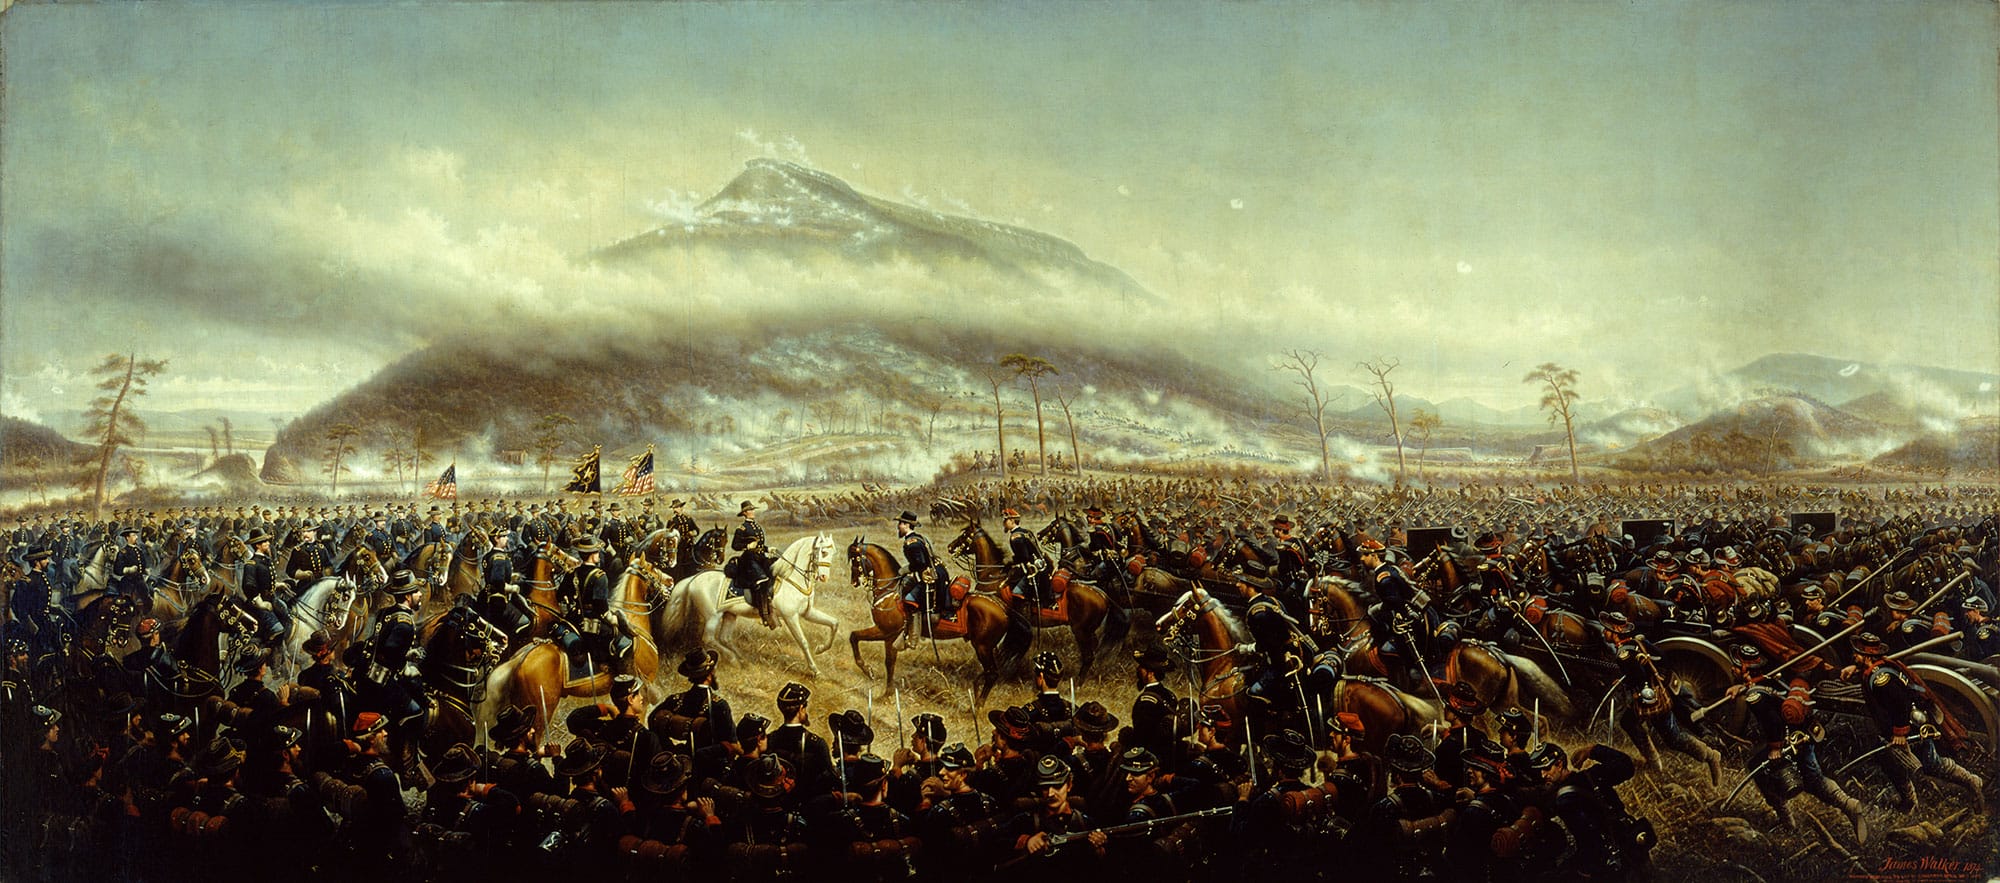 A painting of a battle in front of a mountain.